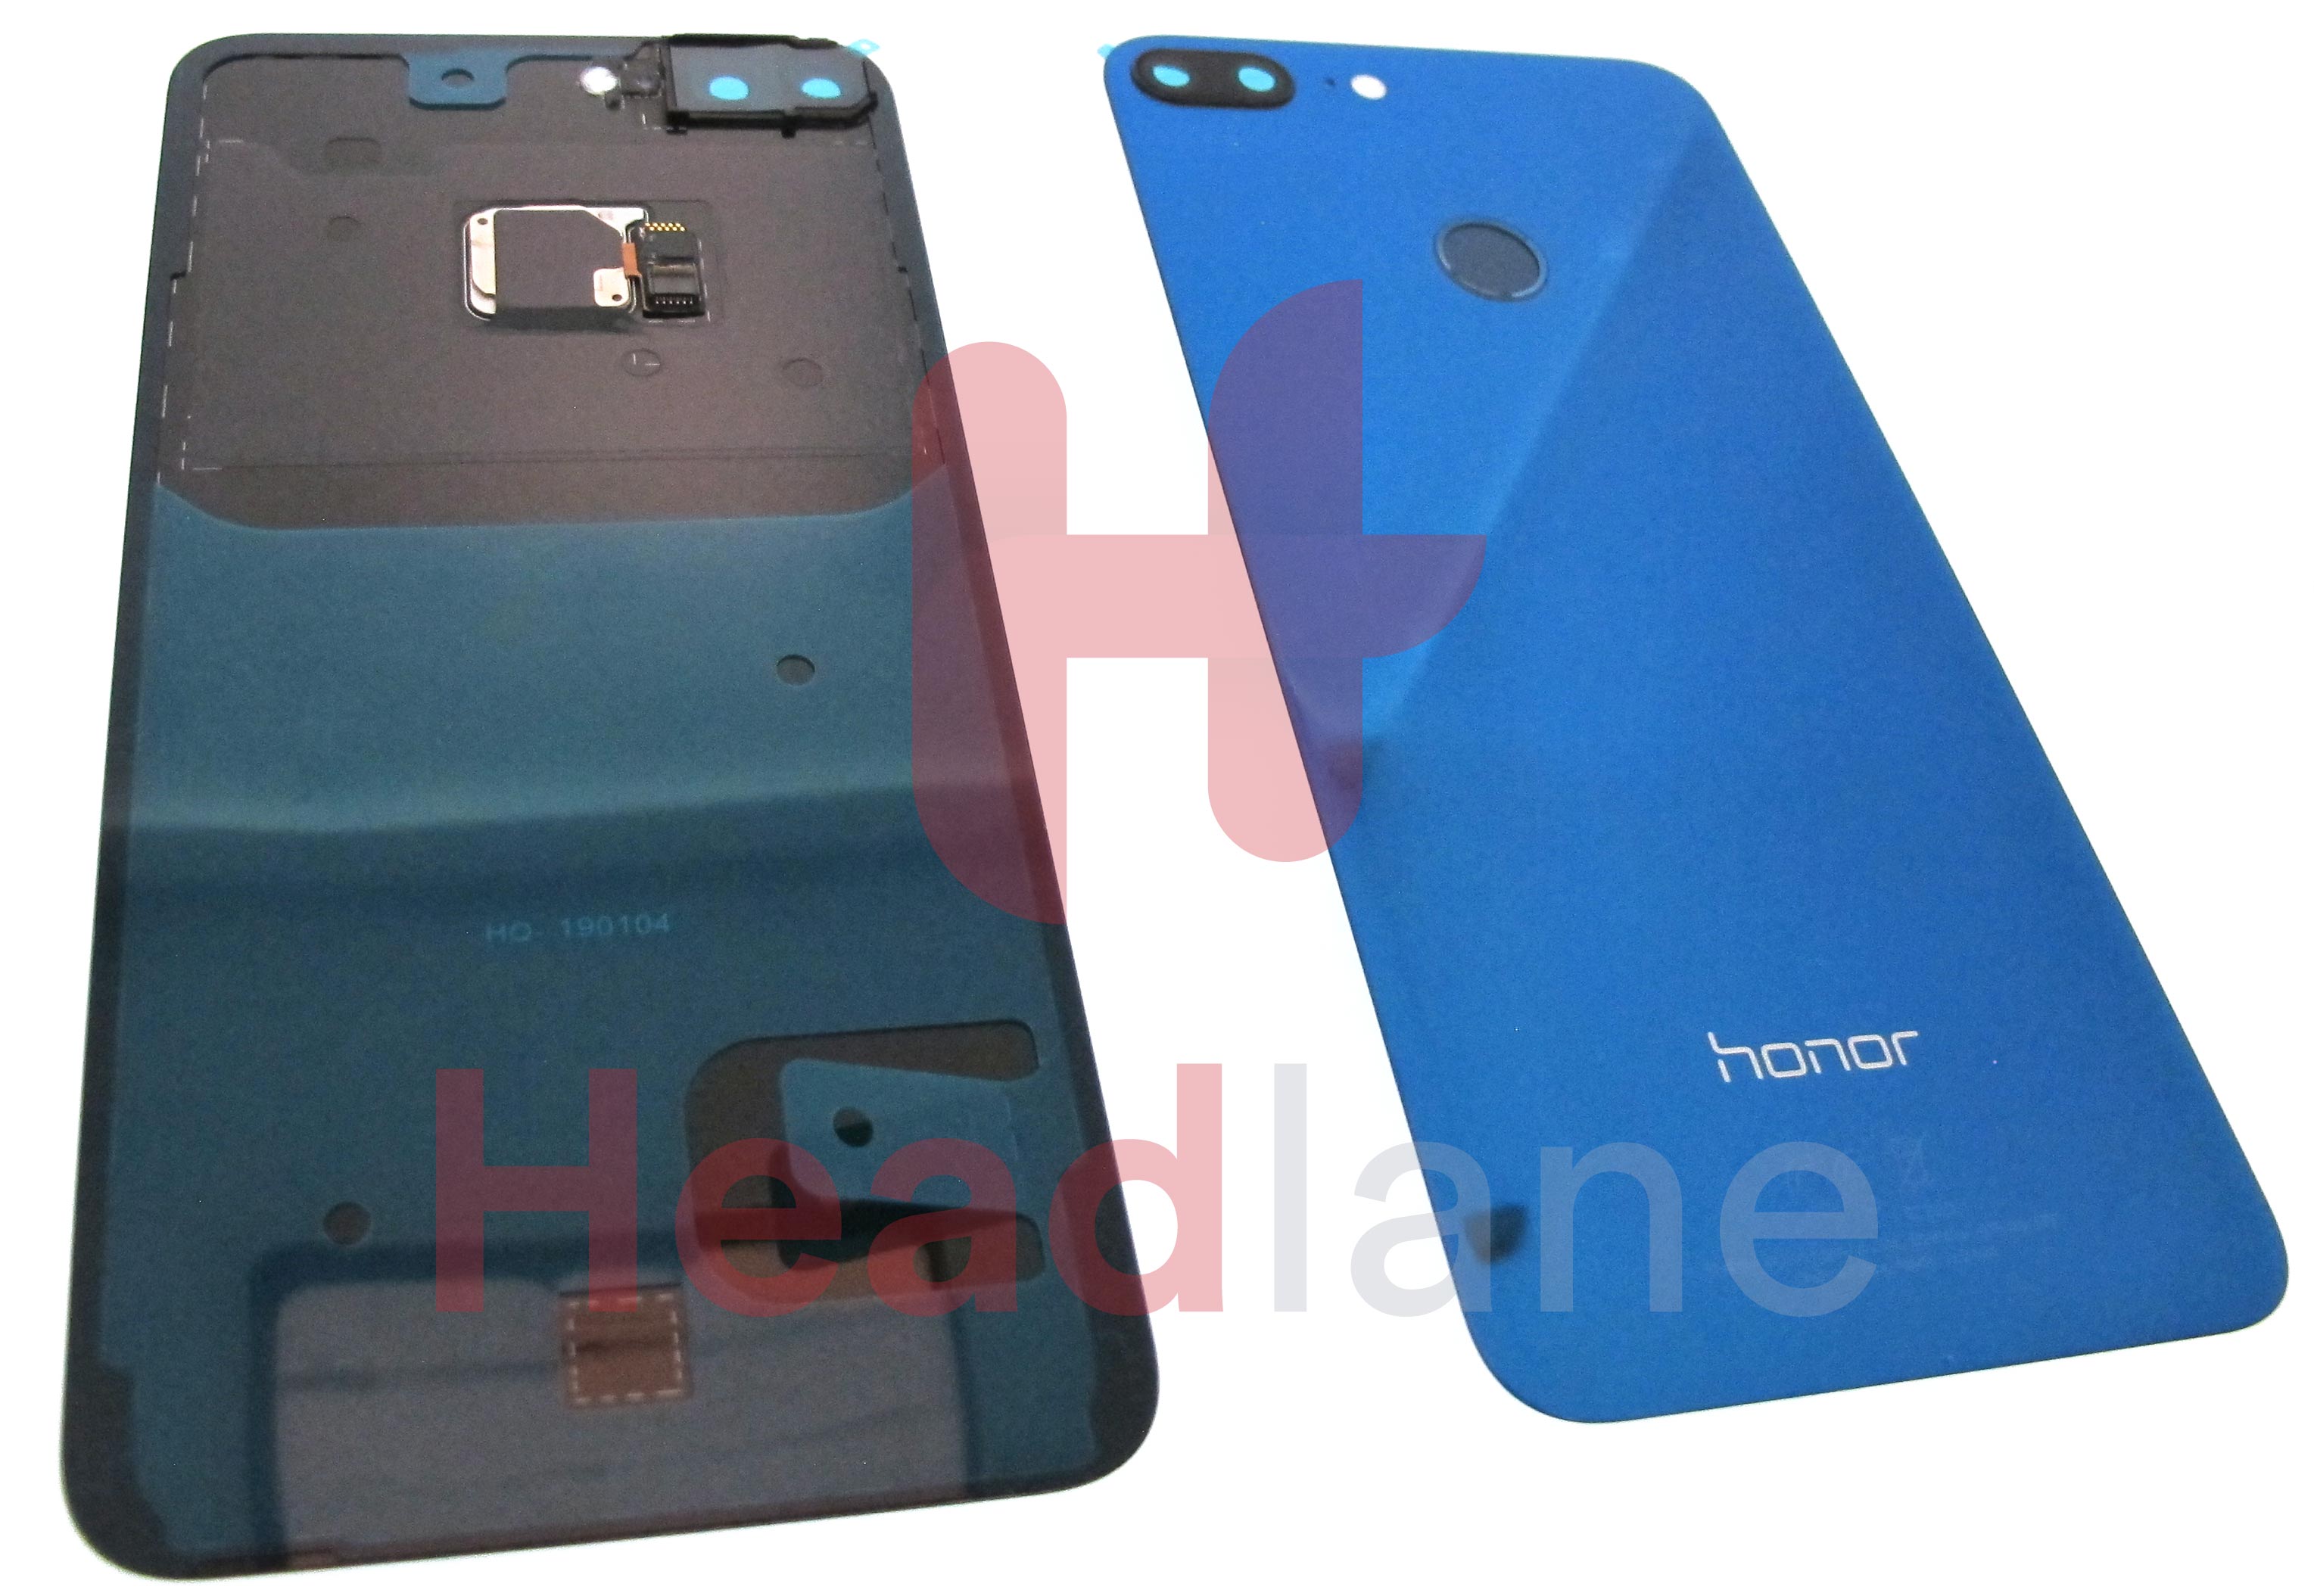 Huawei Honor 9 Lite Back / Battery Cover - Blue